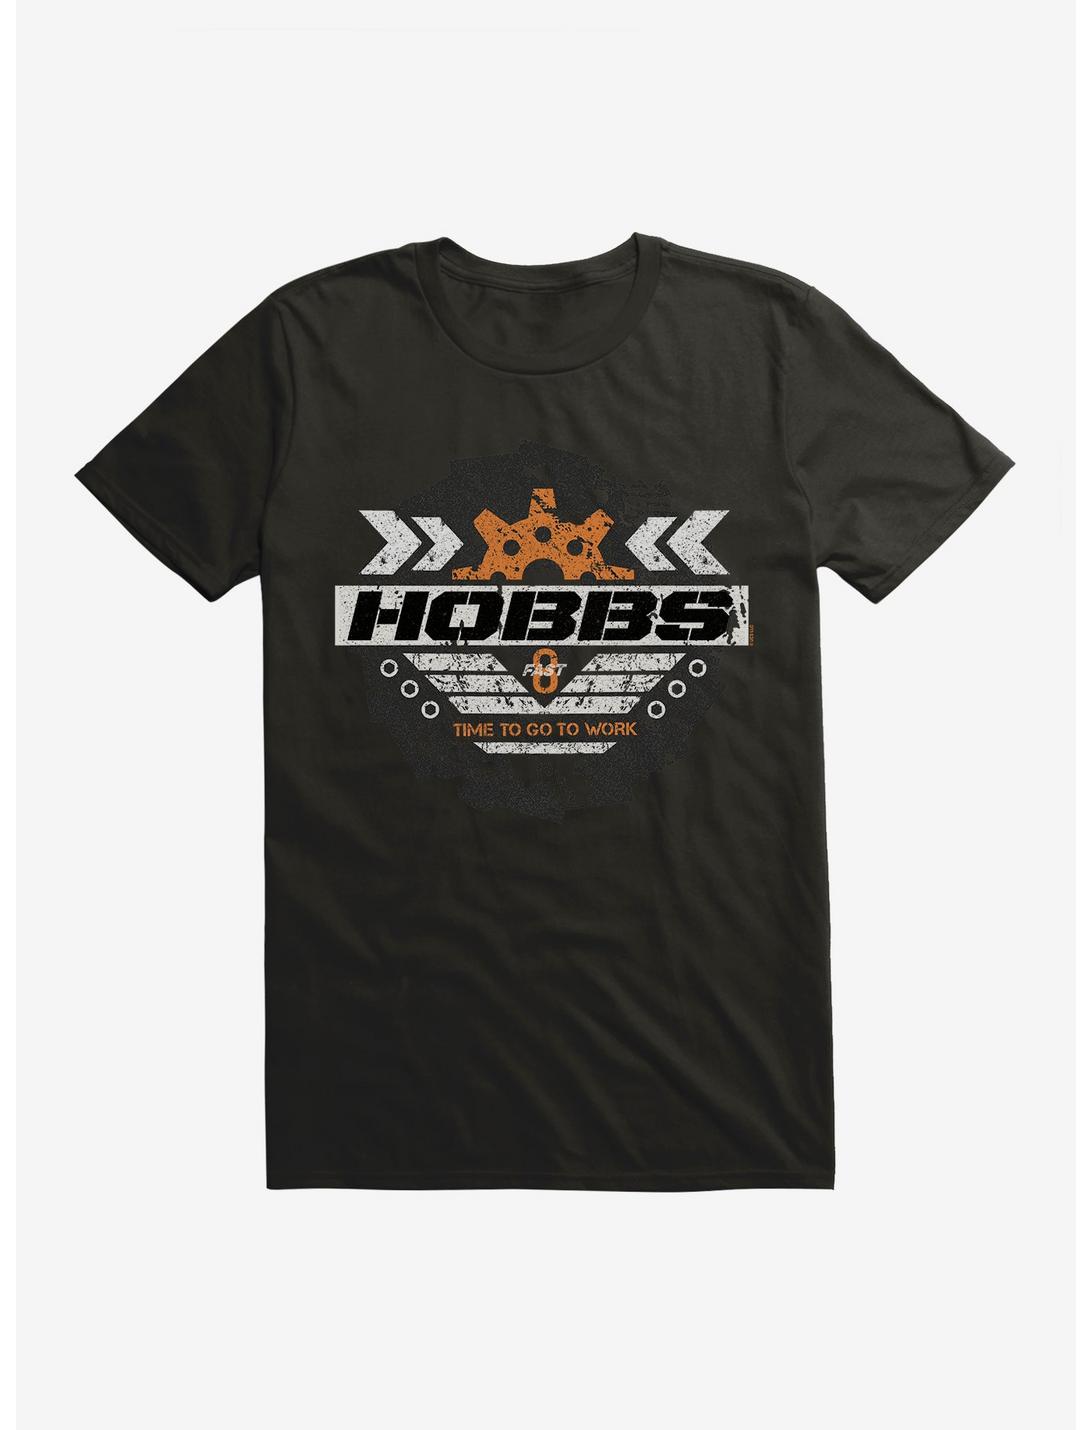 The Fate Of The Furious Hobbs Time To Work T-Shirt, BLACK, hi-res